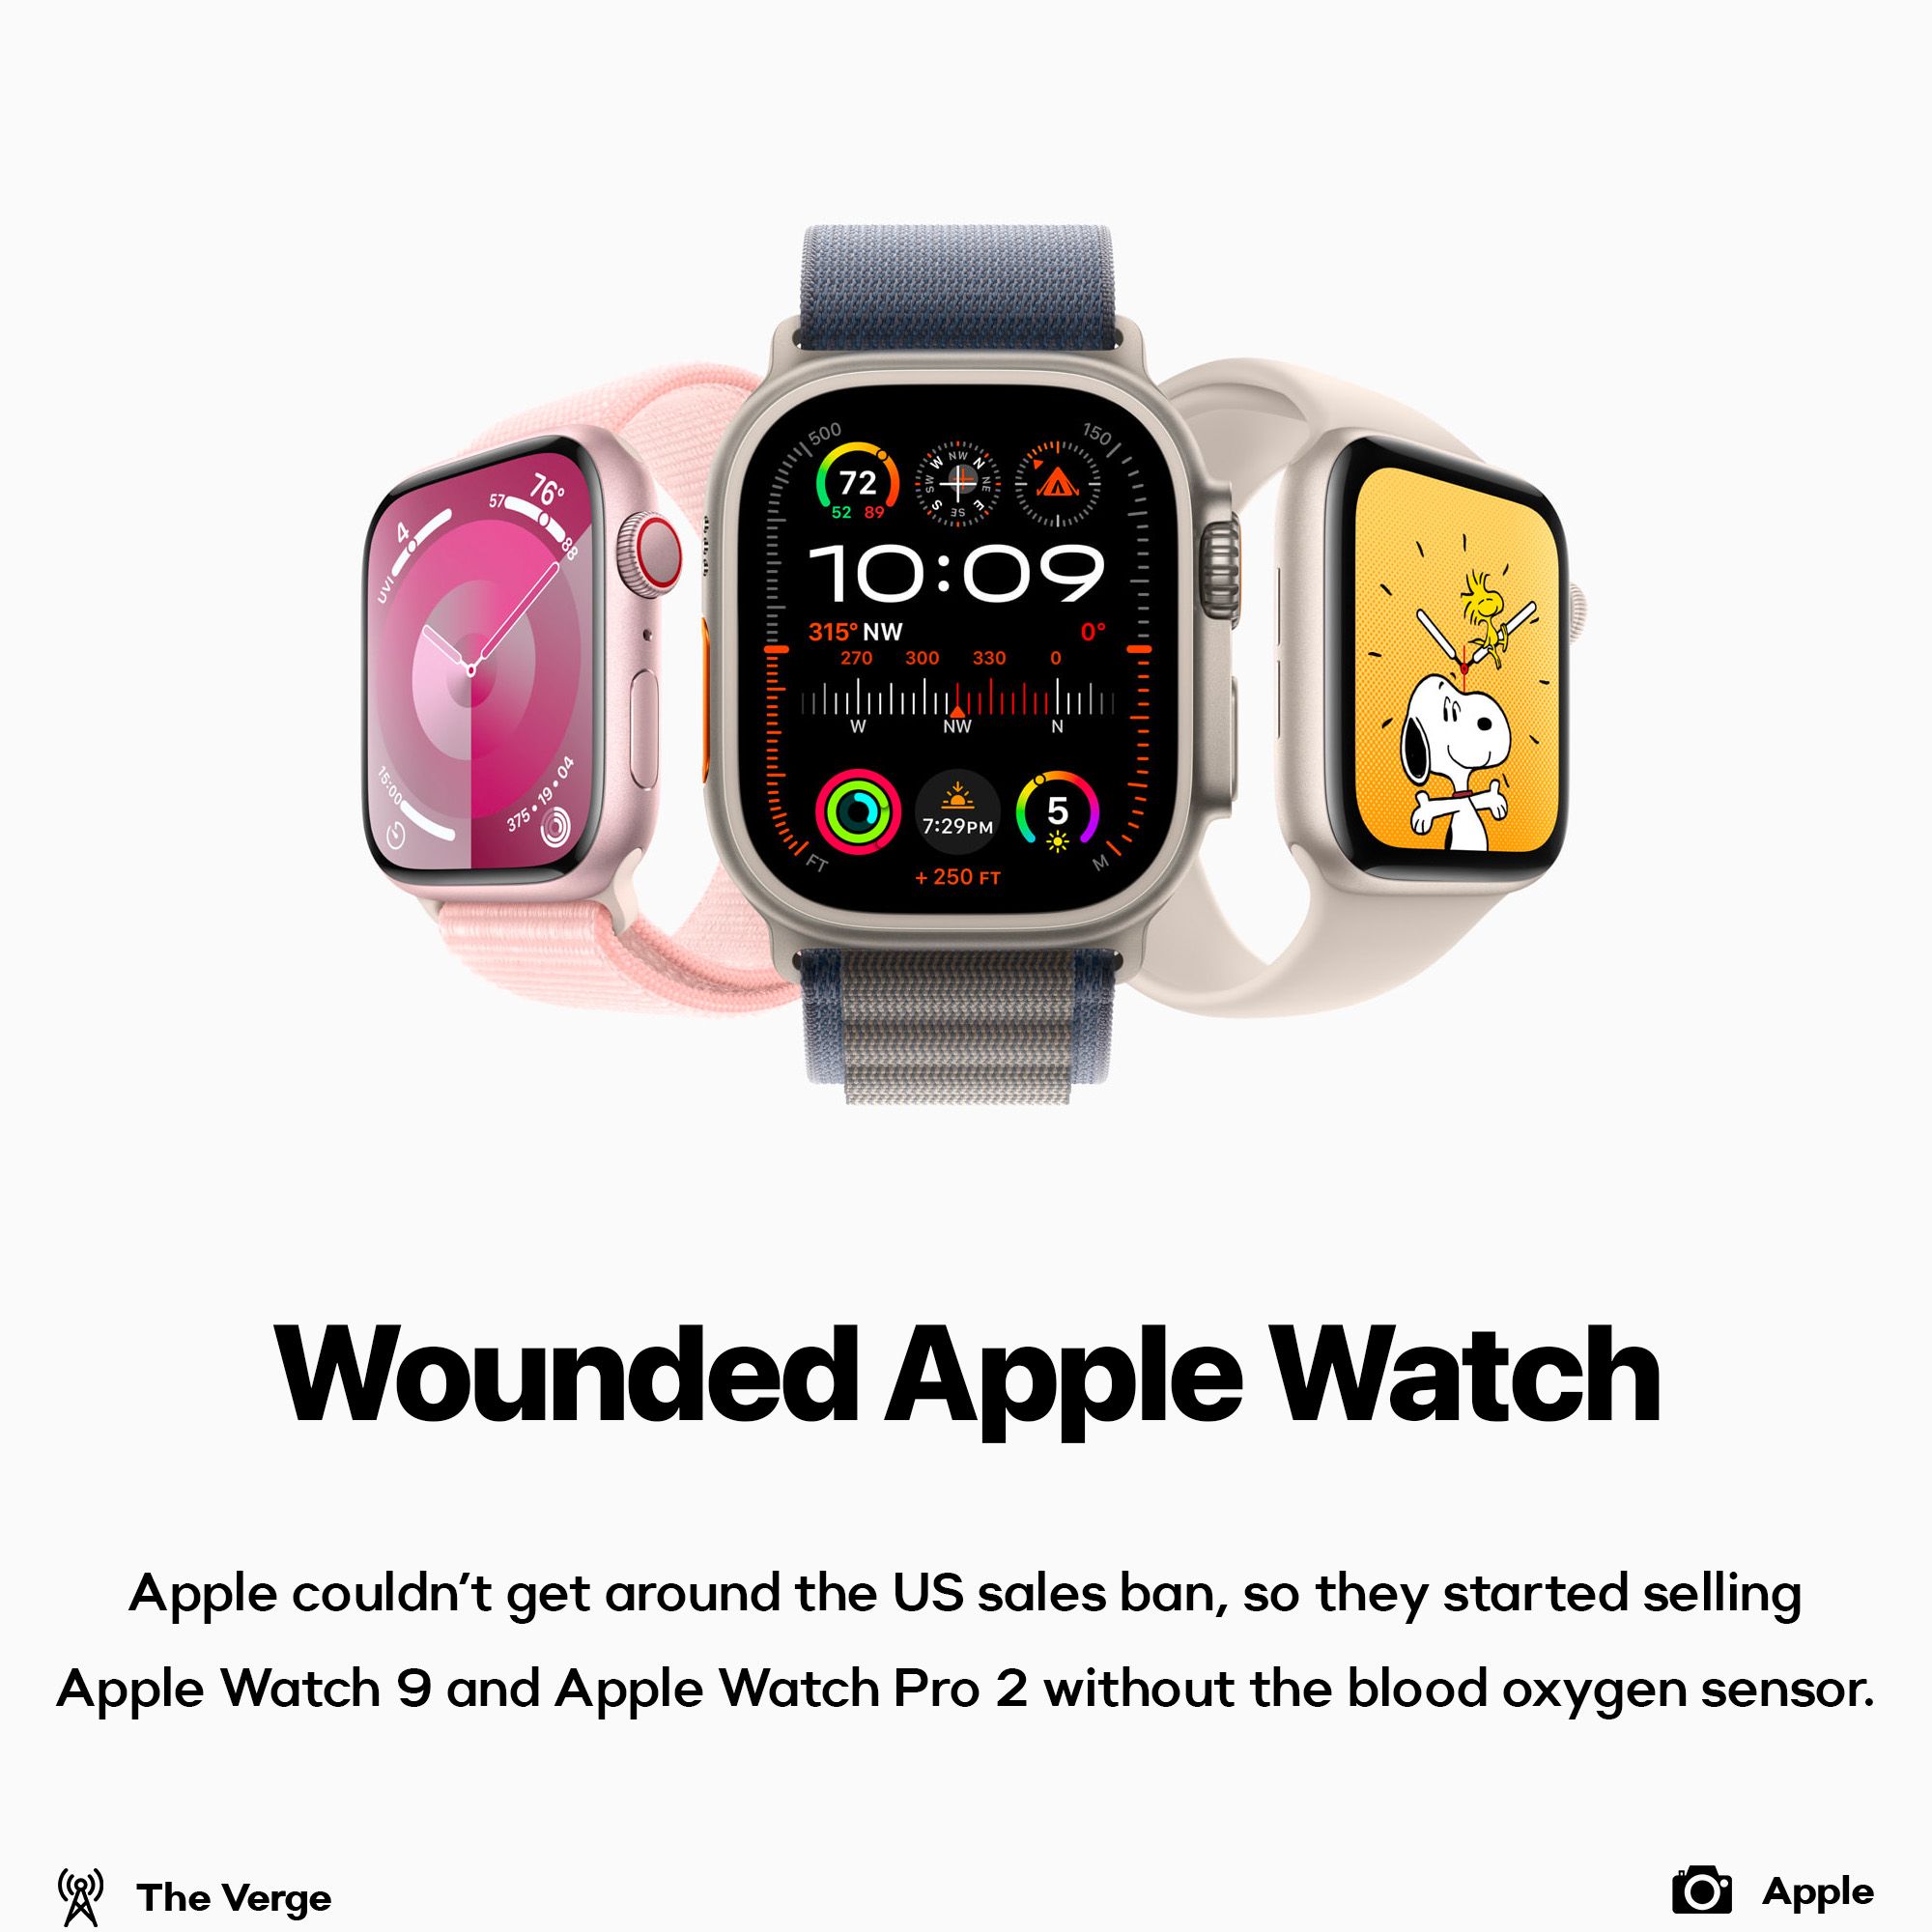 Apple Watch without blood oxygen sensor sold in US Stores